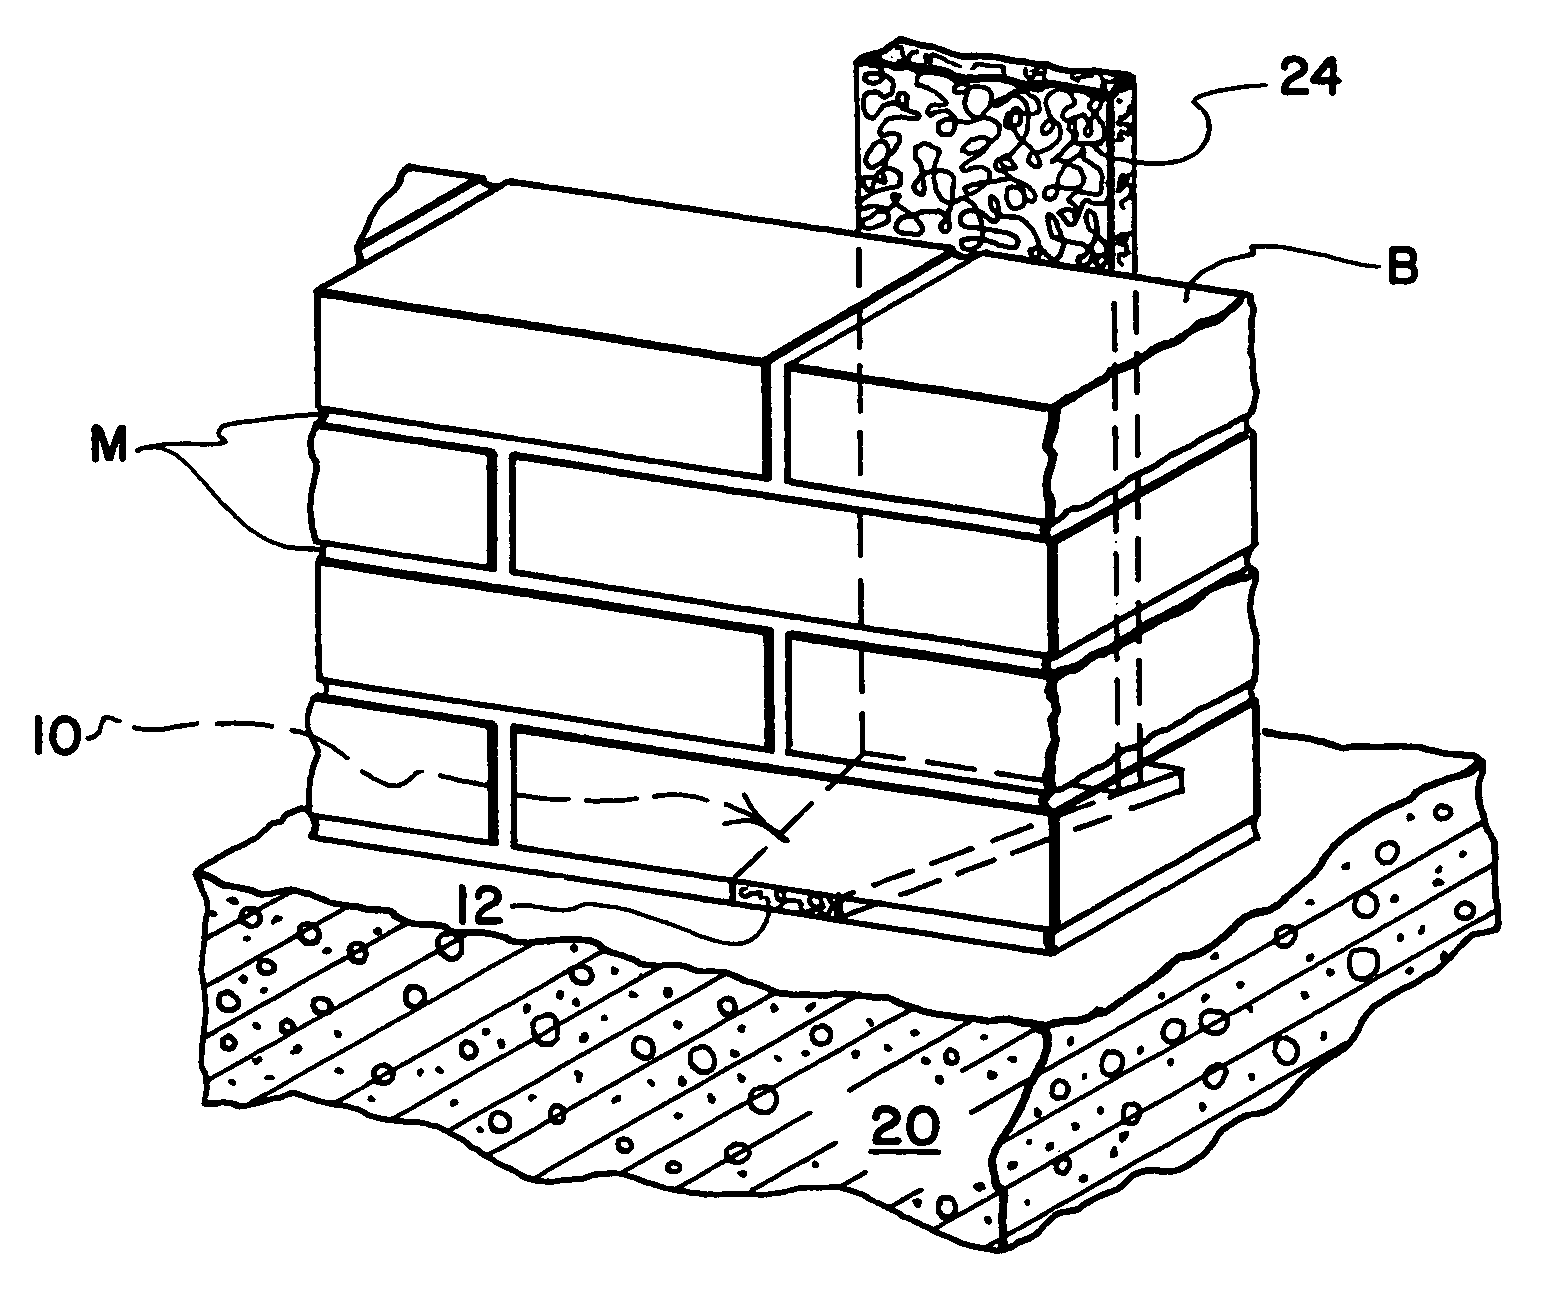 Weep venting system for masonry walls